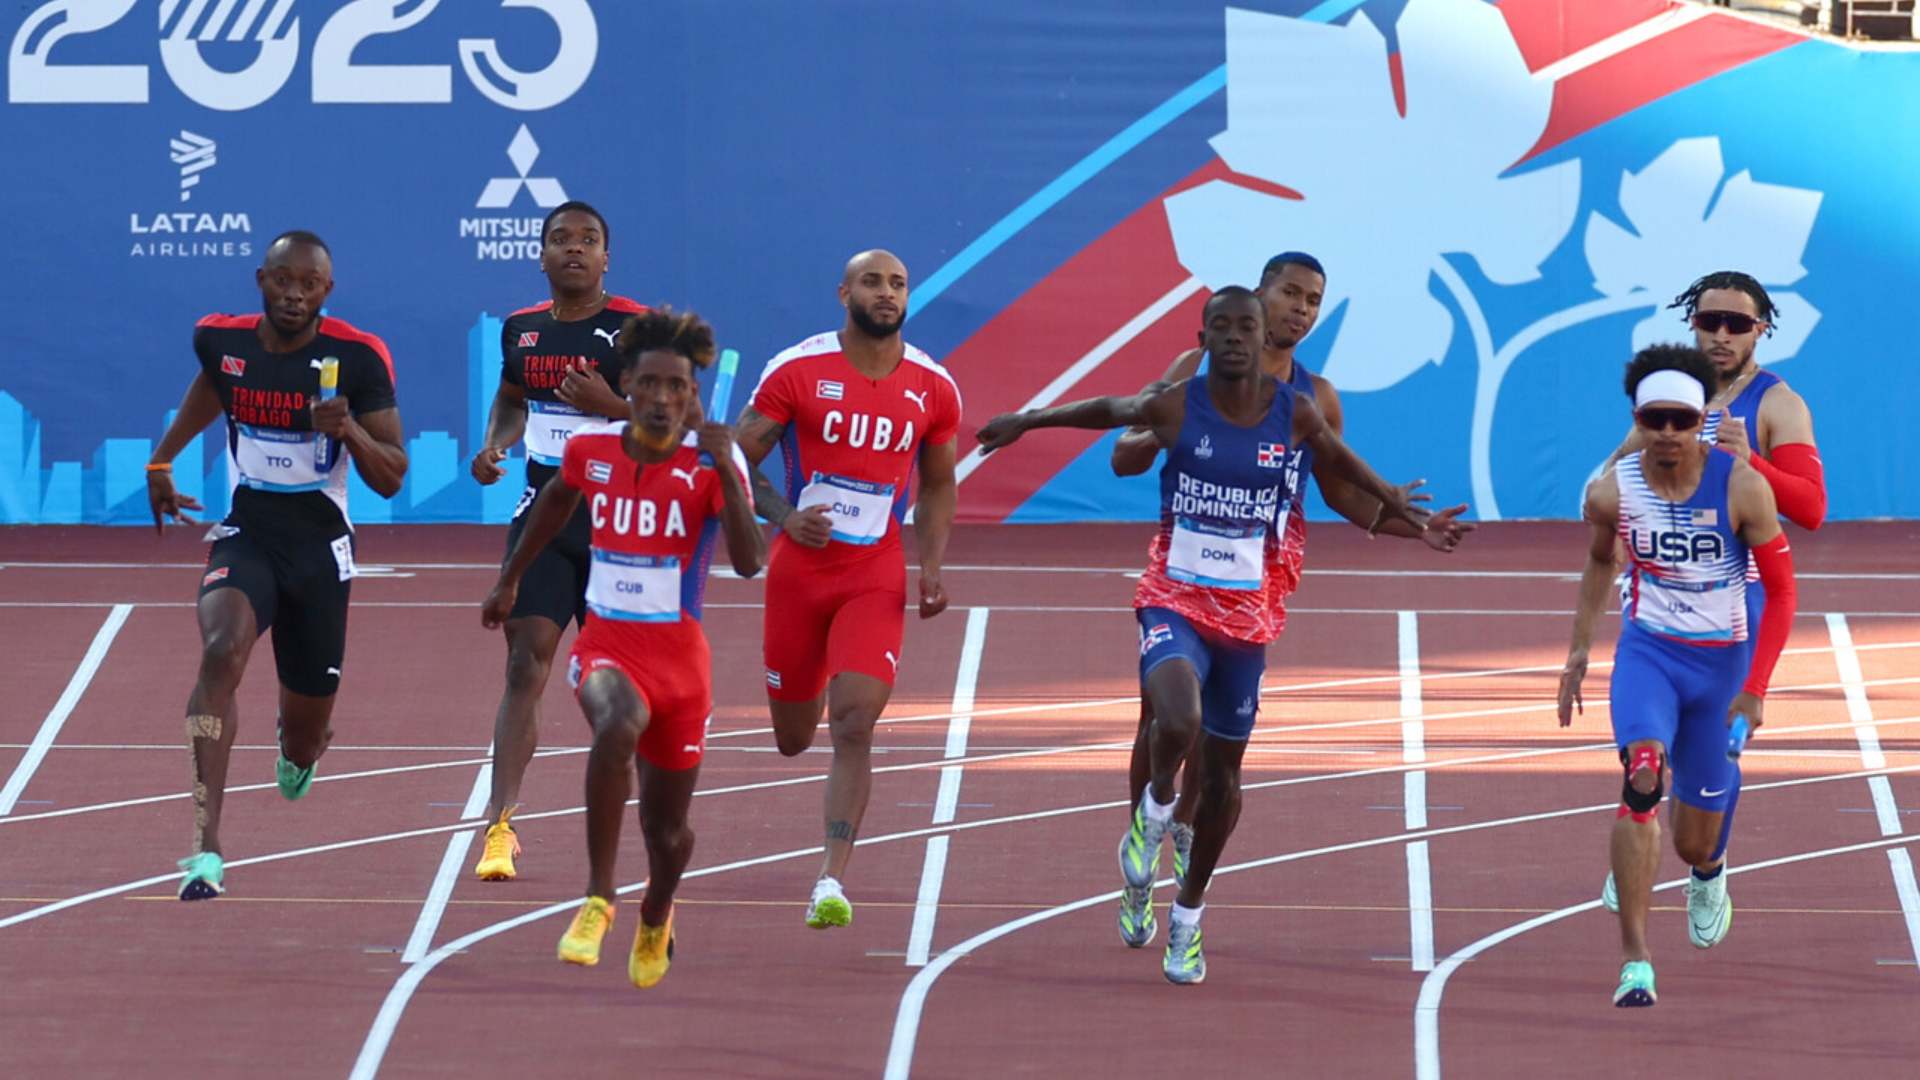 Brazil, the United States, and Cuba dominate semi-finals of the male's 4x100